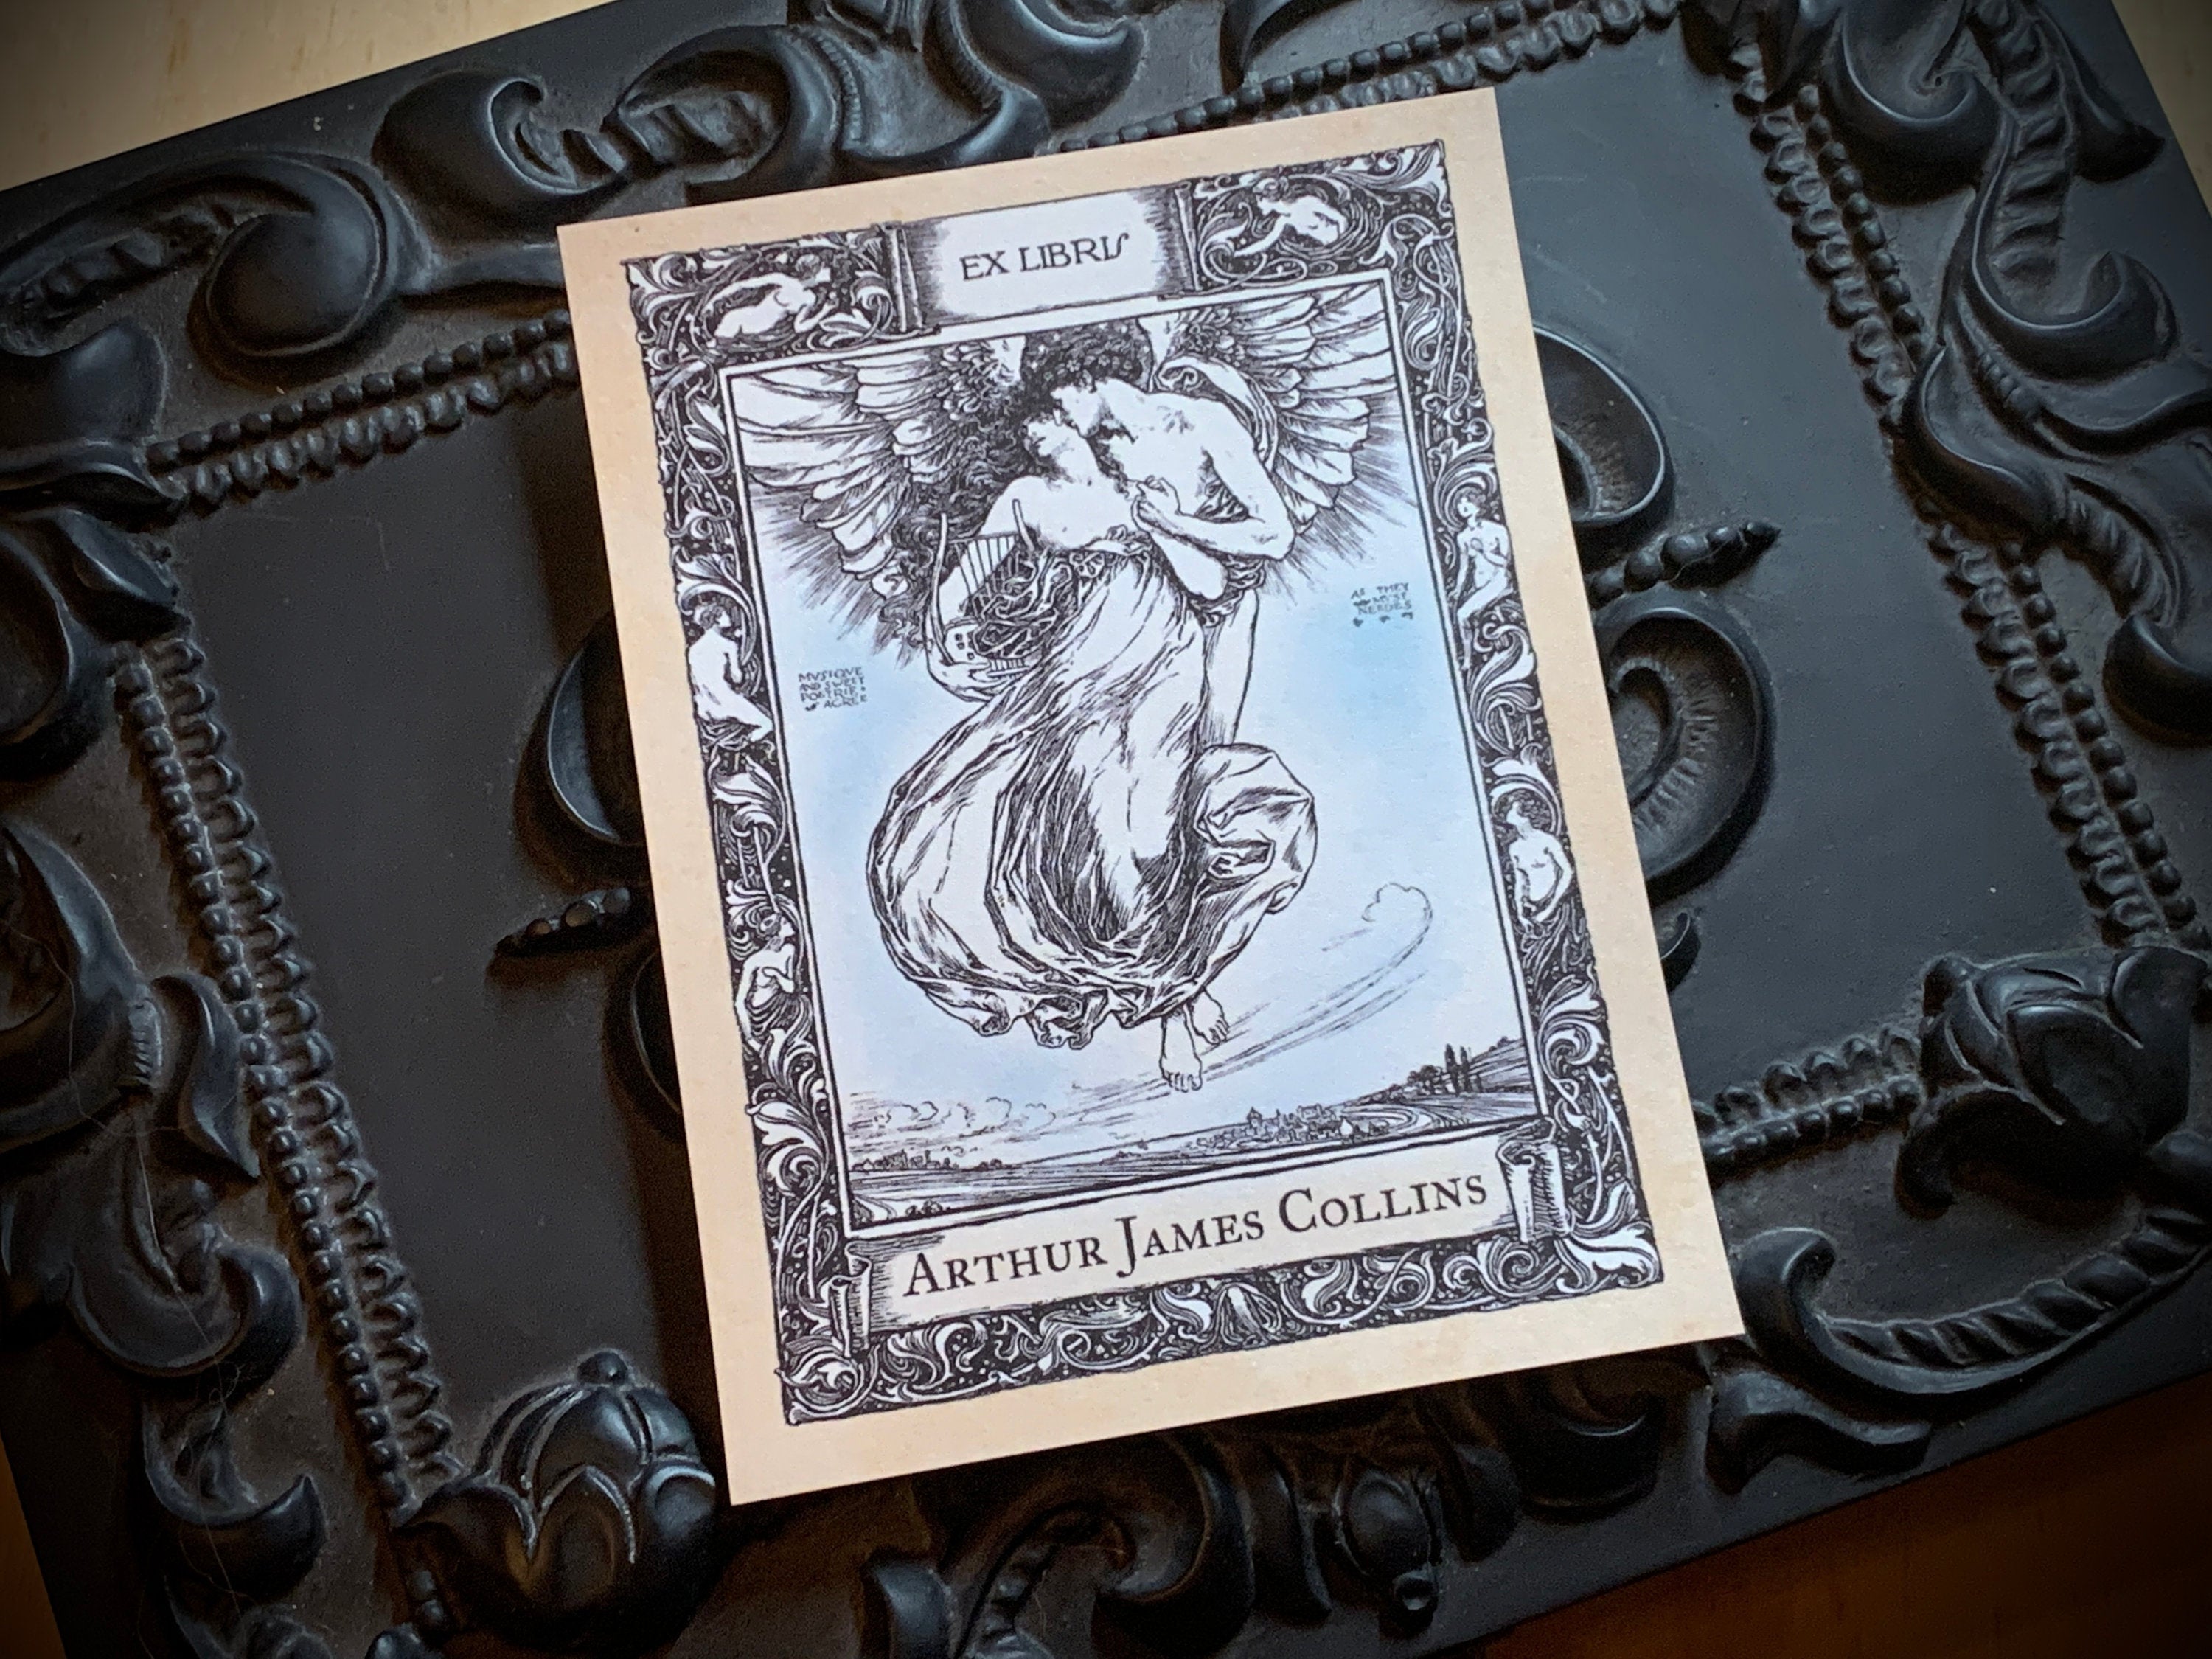 Cupid and Psyche, Personalized Ex-Libris Bookplates, Crafted on Traditional Gummed Paper, 3in x 4in, Set of 30